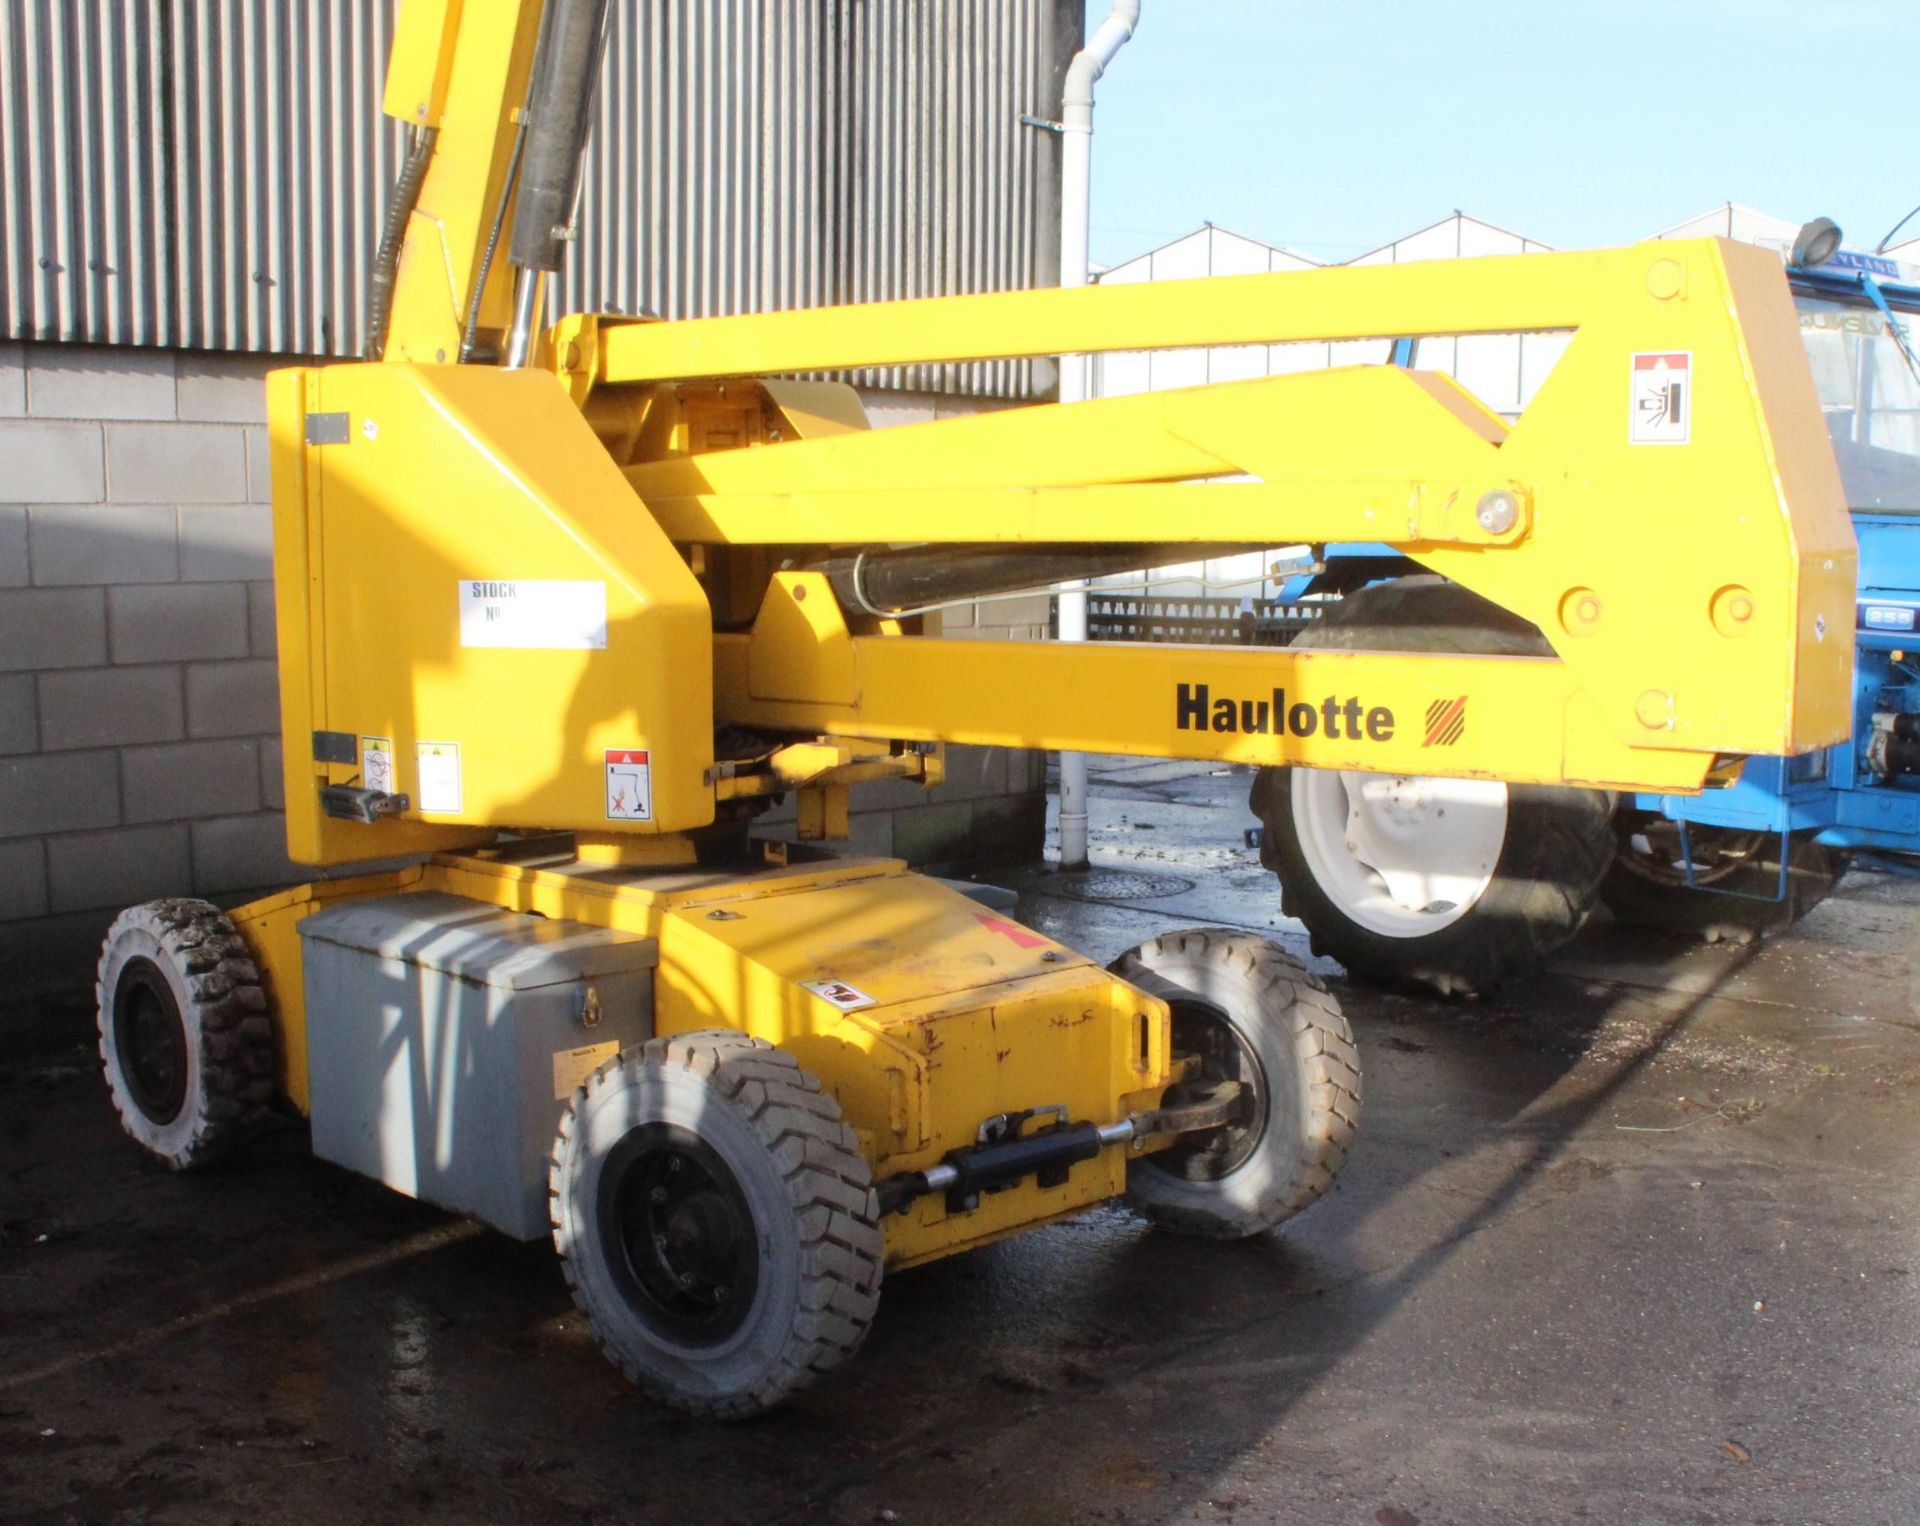 INDOOR HAULETTE HAISI 48V HA15 CHERRY PICKER APPROX 2000 HOURS BUILT IN 110/240V CHARGER 15 METRE - Image 2 of 10